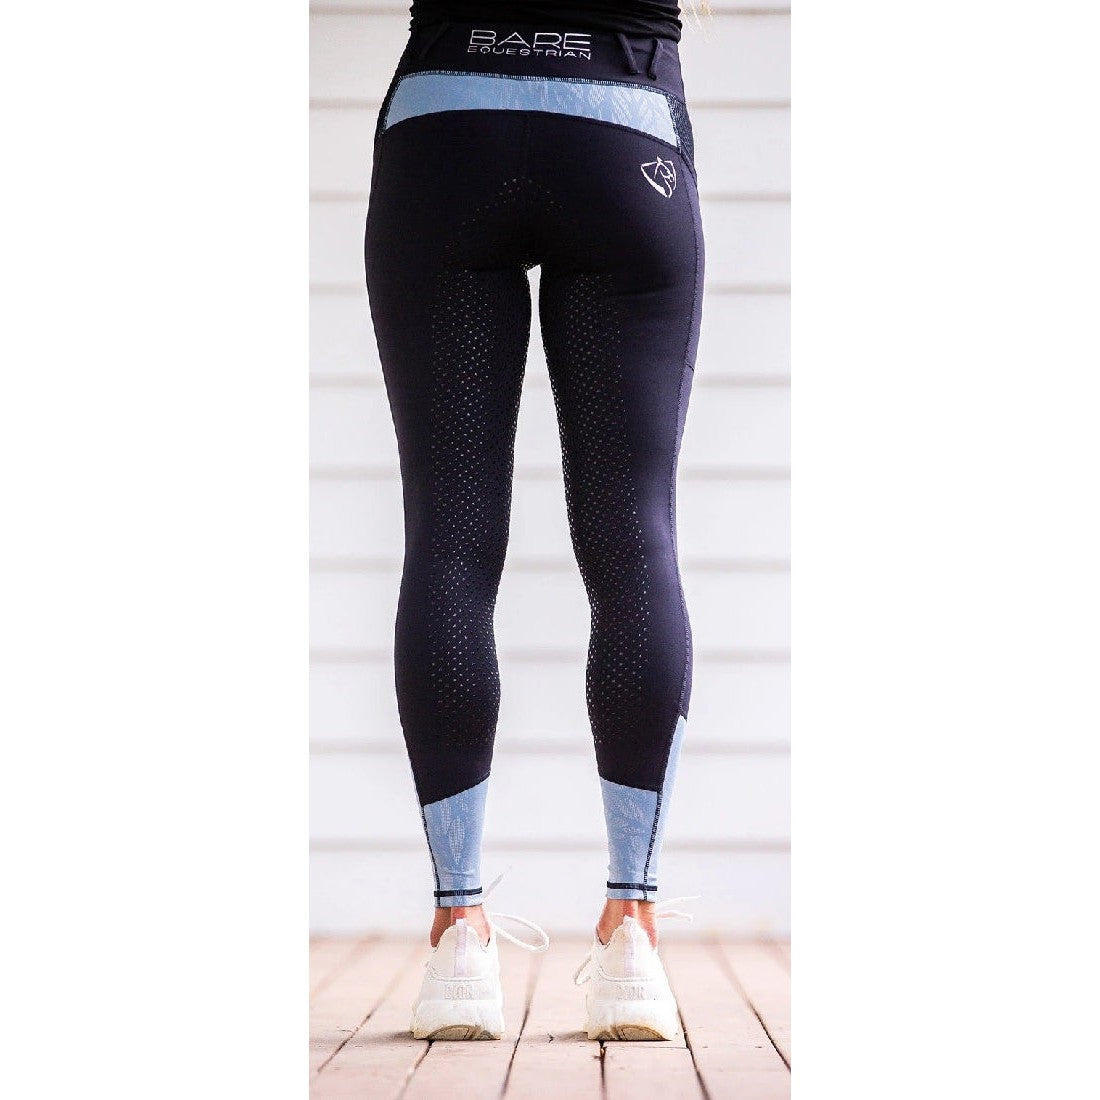 Person standing in horse riding tights with silicone grip pattern.